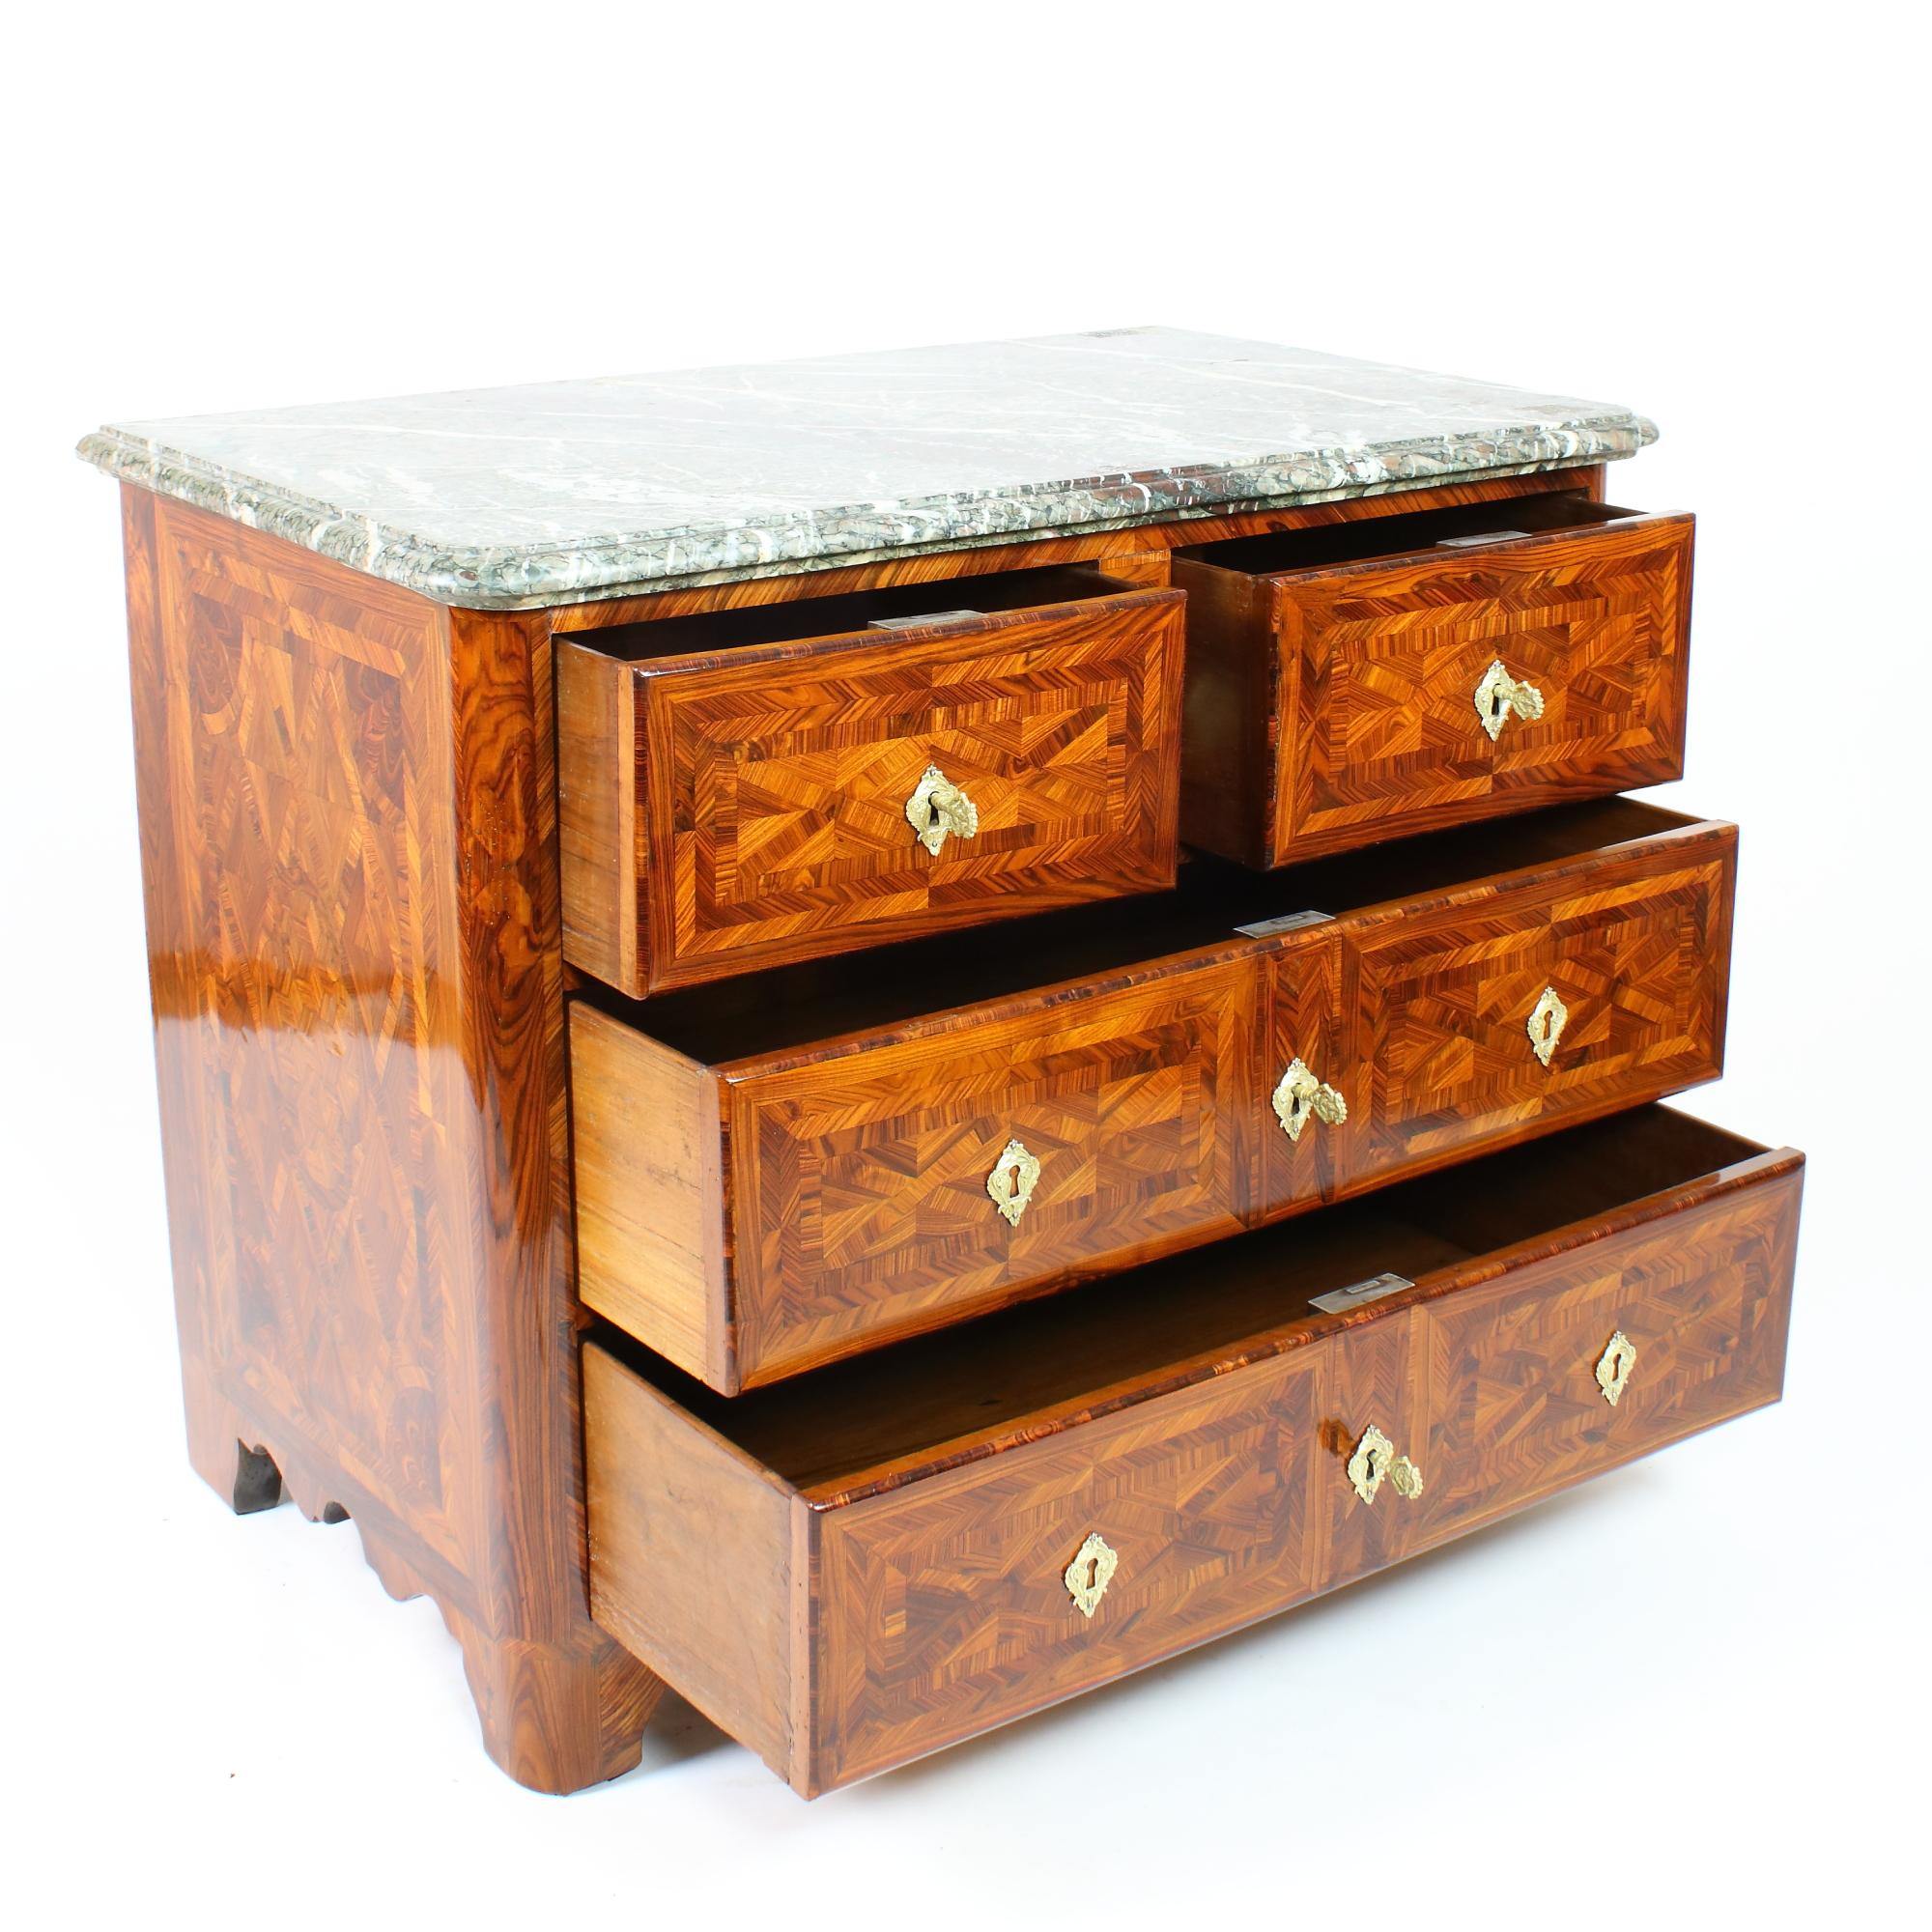 Early 18th Century French Louis XIV/Régence Period Trellis Marquetry Commode For Sale 1